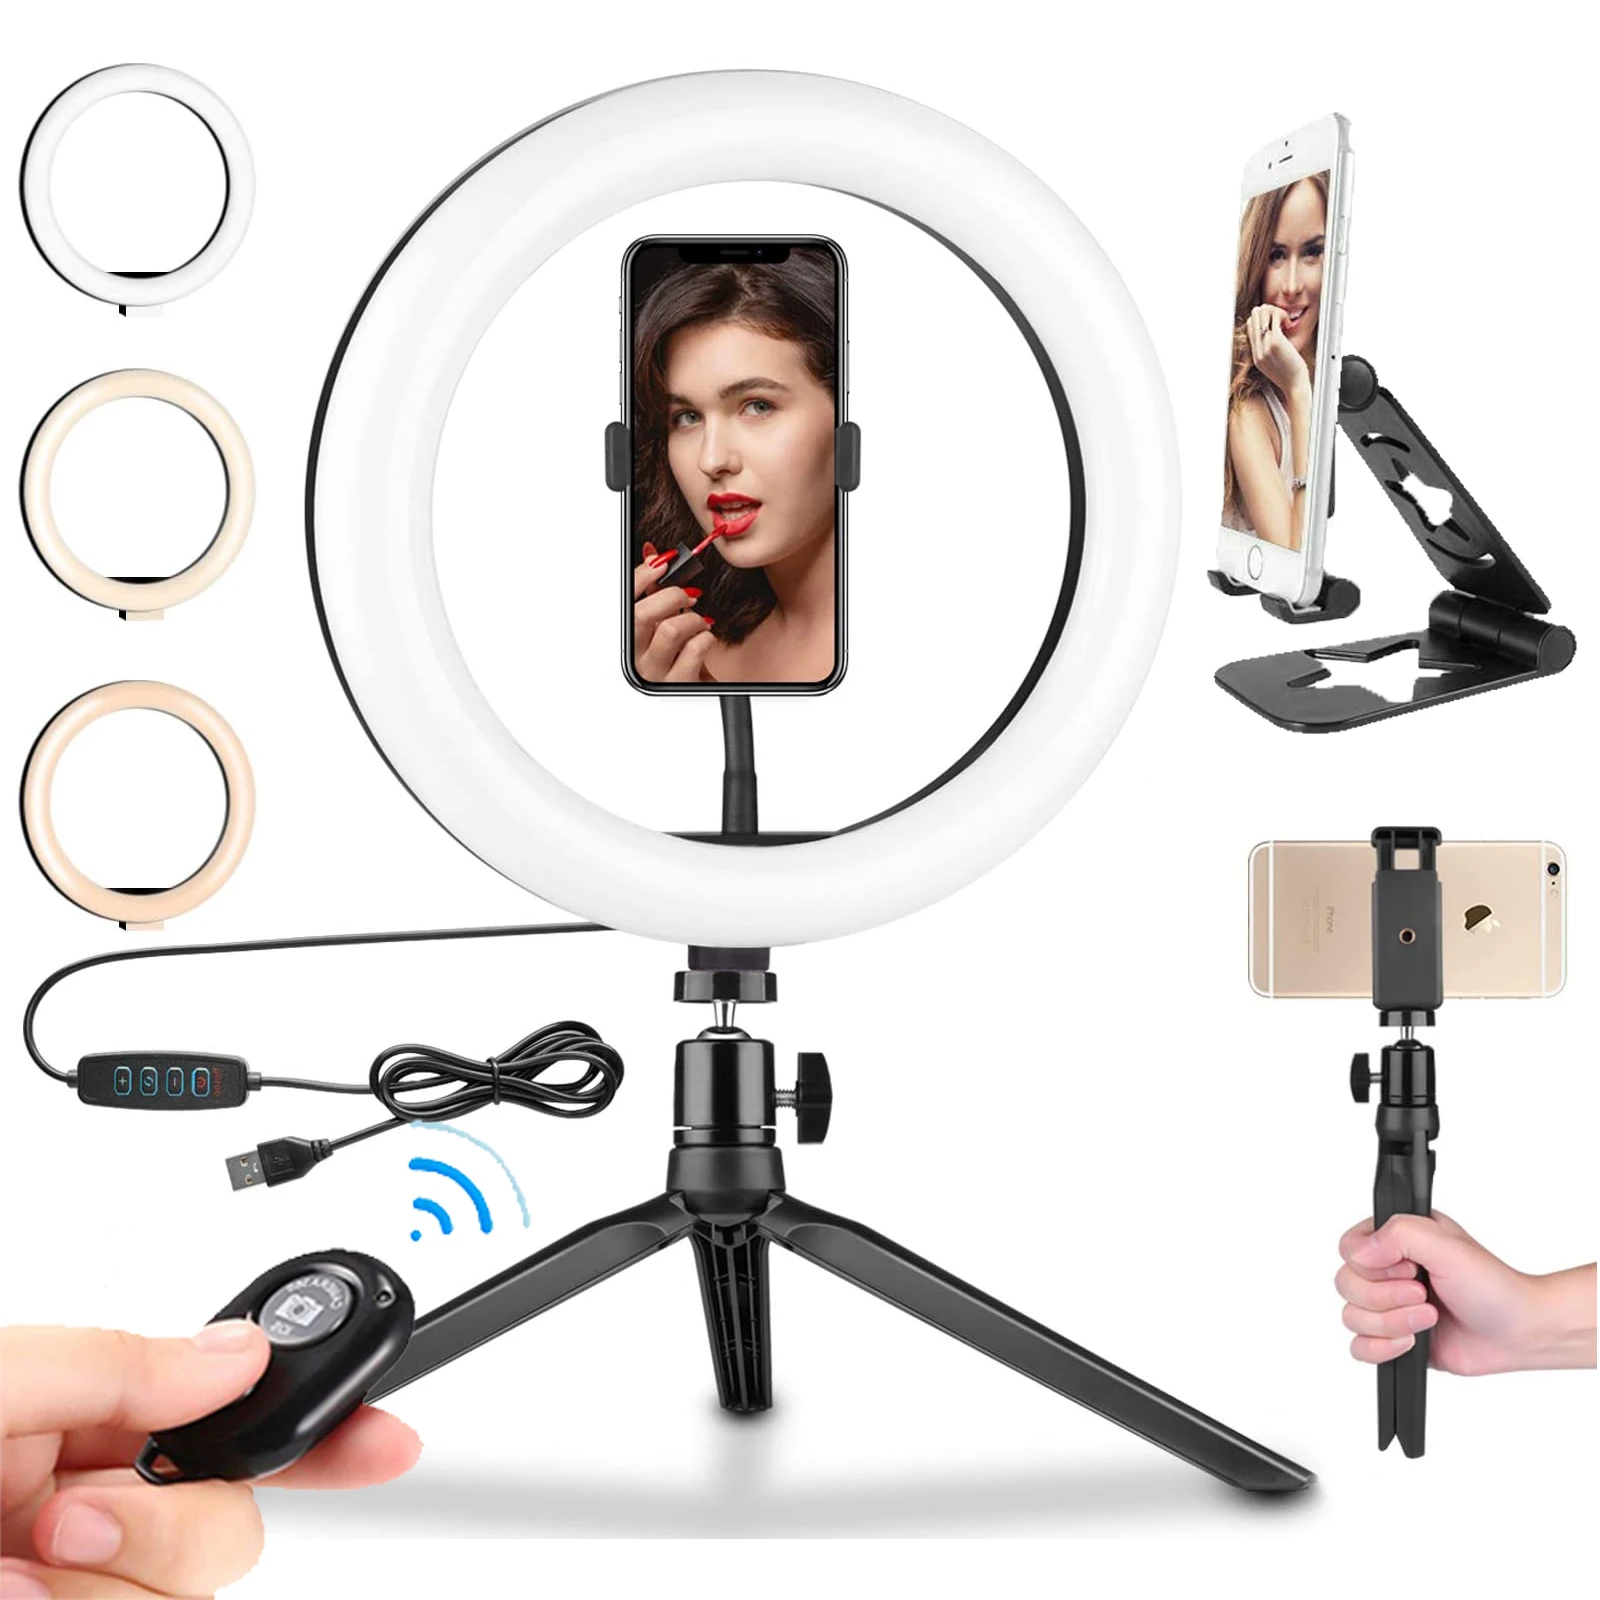 

Selfie 10" Photography Lamp Fill Ring Light LED Dimmable Ringlight Tripod Stand Phone Holder Makeup Live Vlog Streaming YouTube